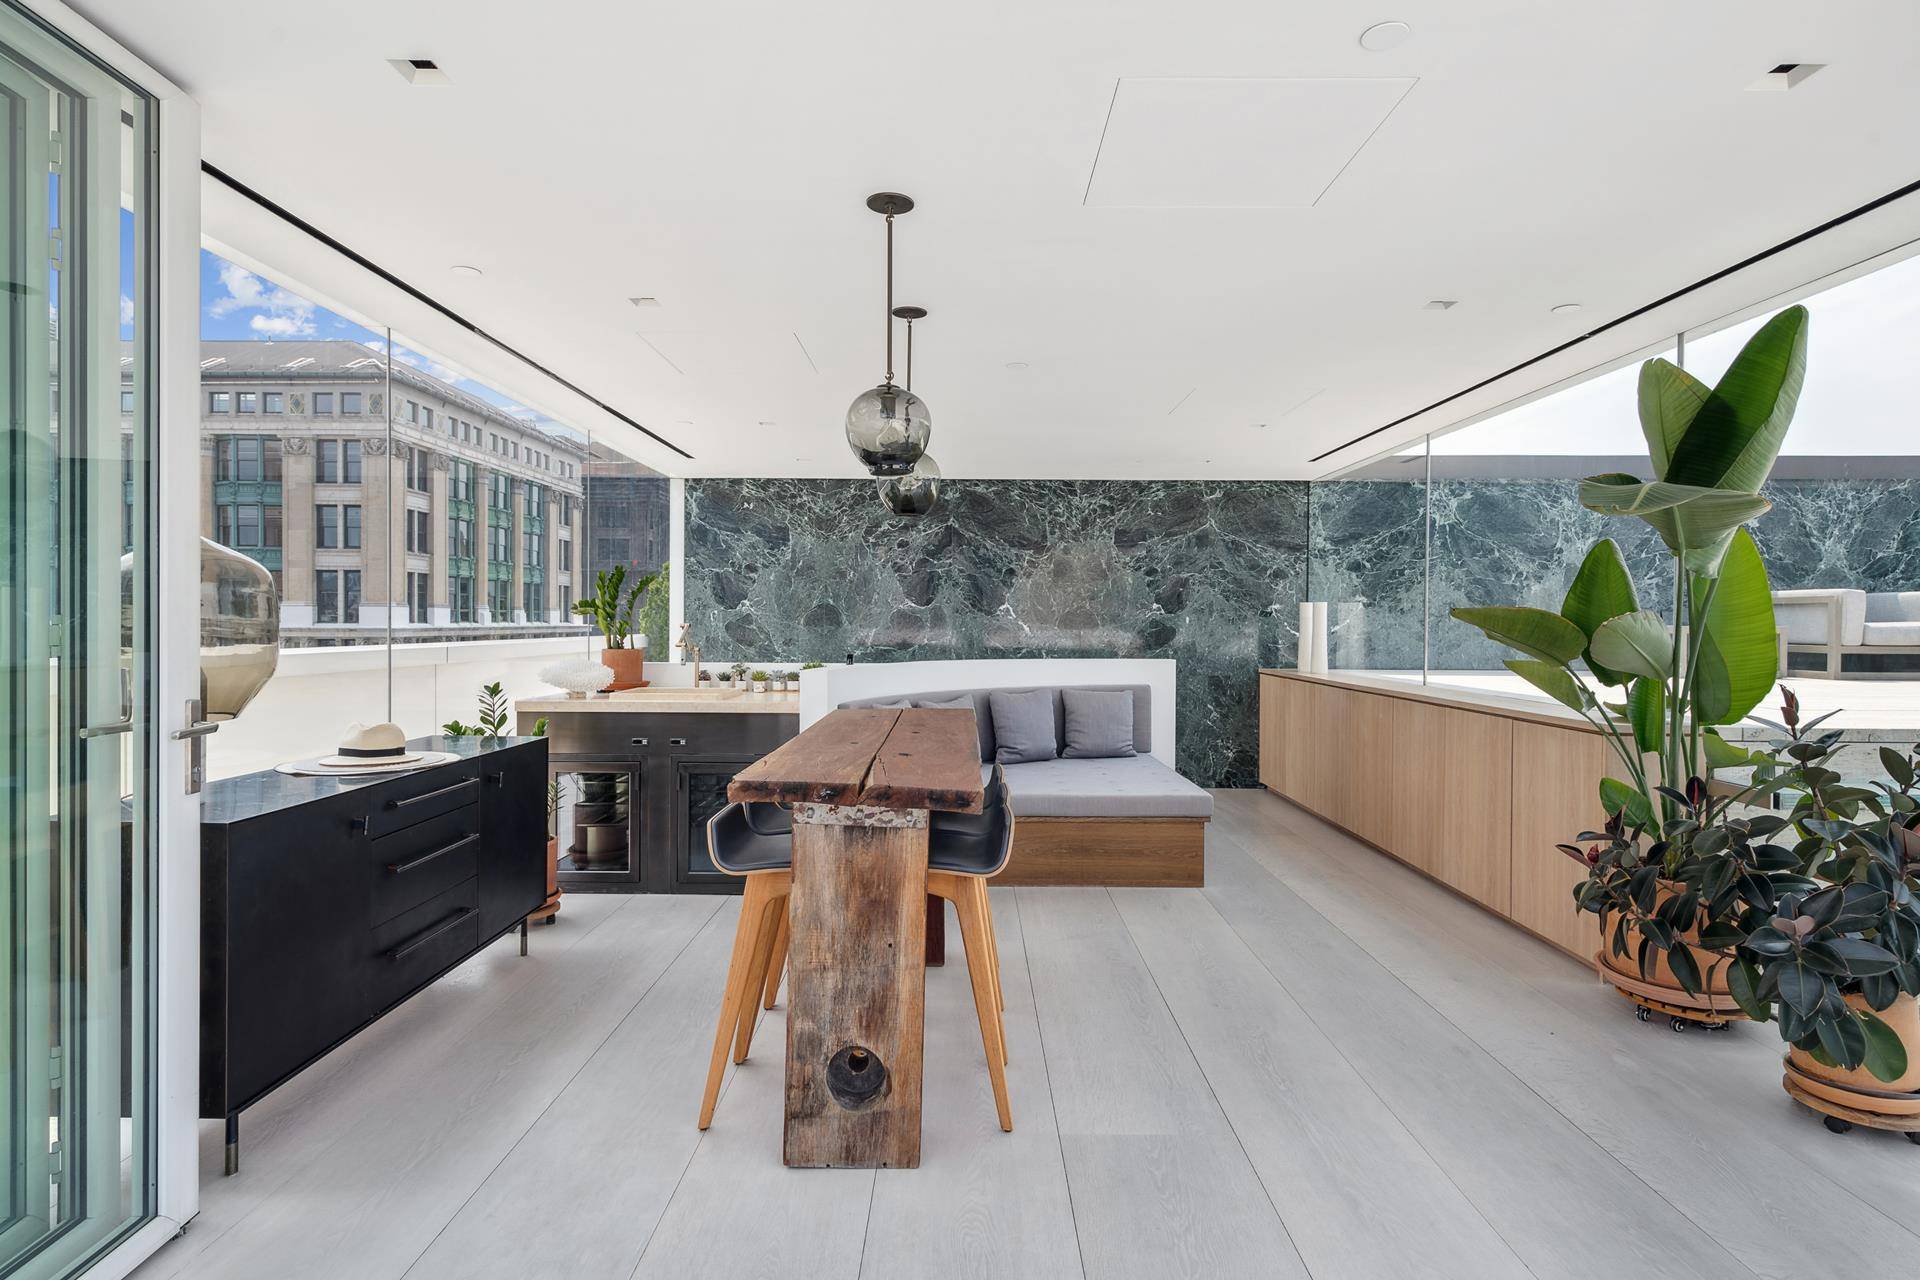 From the master design studio of Matthew Hoey and Soren Rose comes the most enchanting, beautifully designed, meticulously executed home in all of New York City and quite possibly the ...